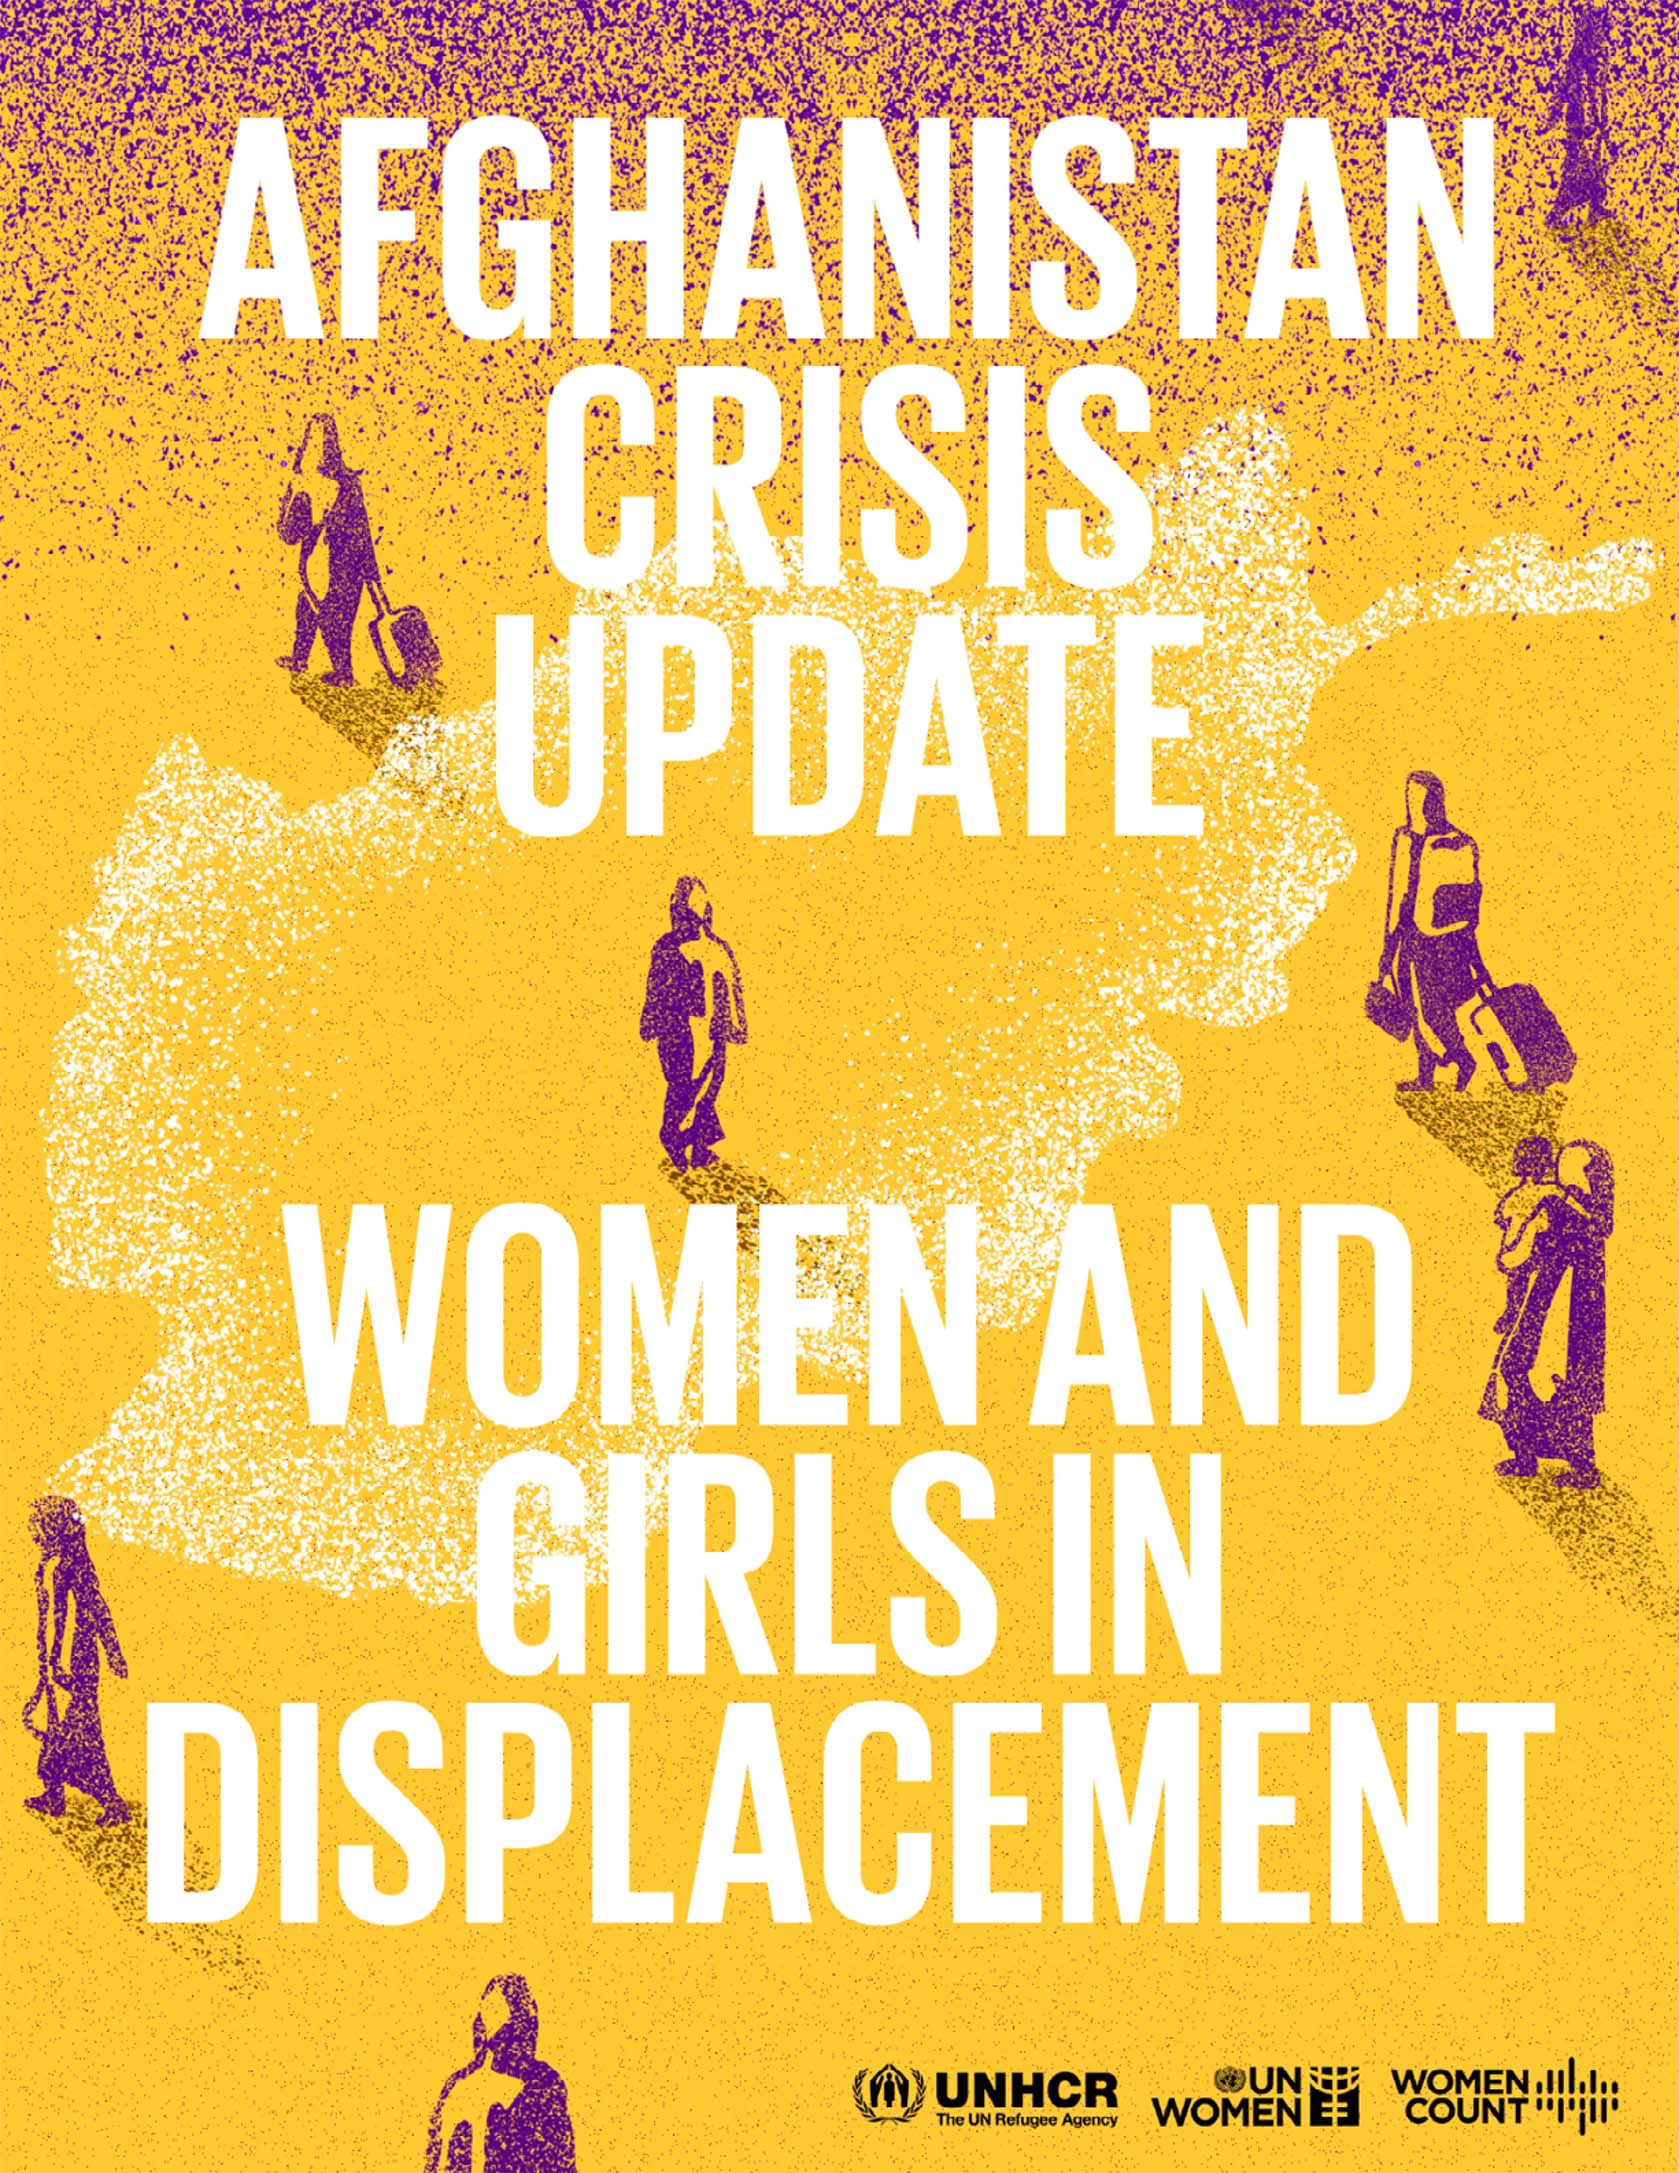 Afghanistan crisis update: Women and girls in displacement